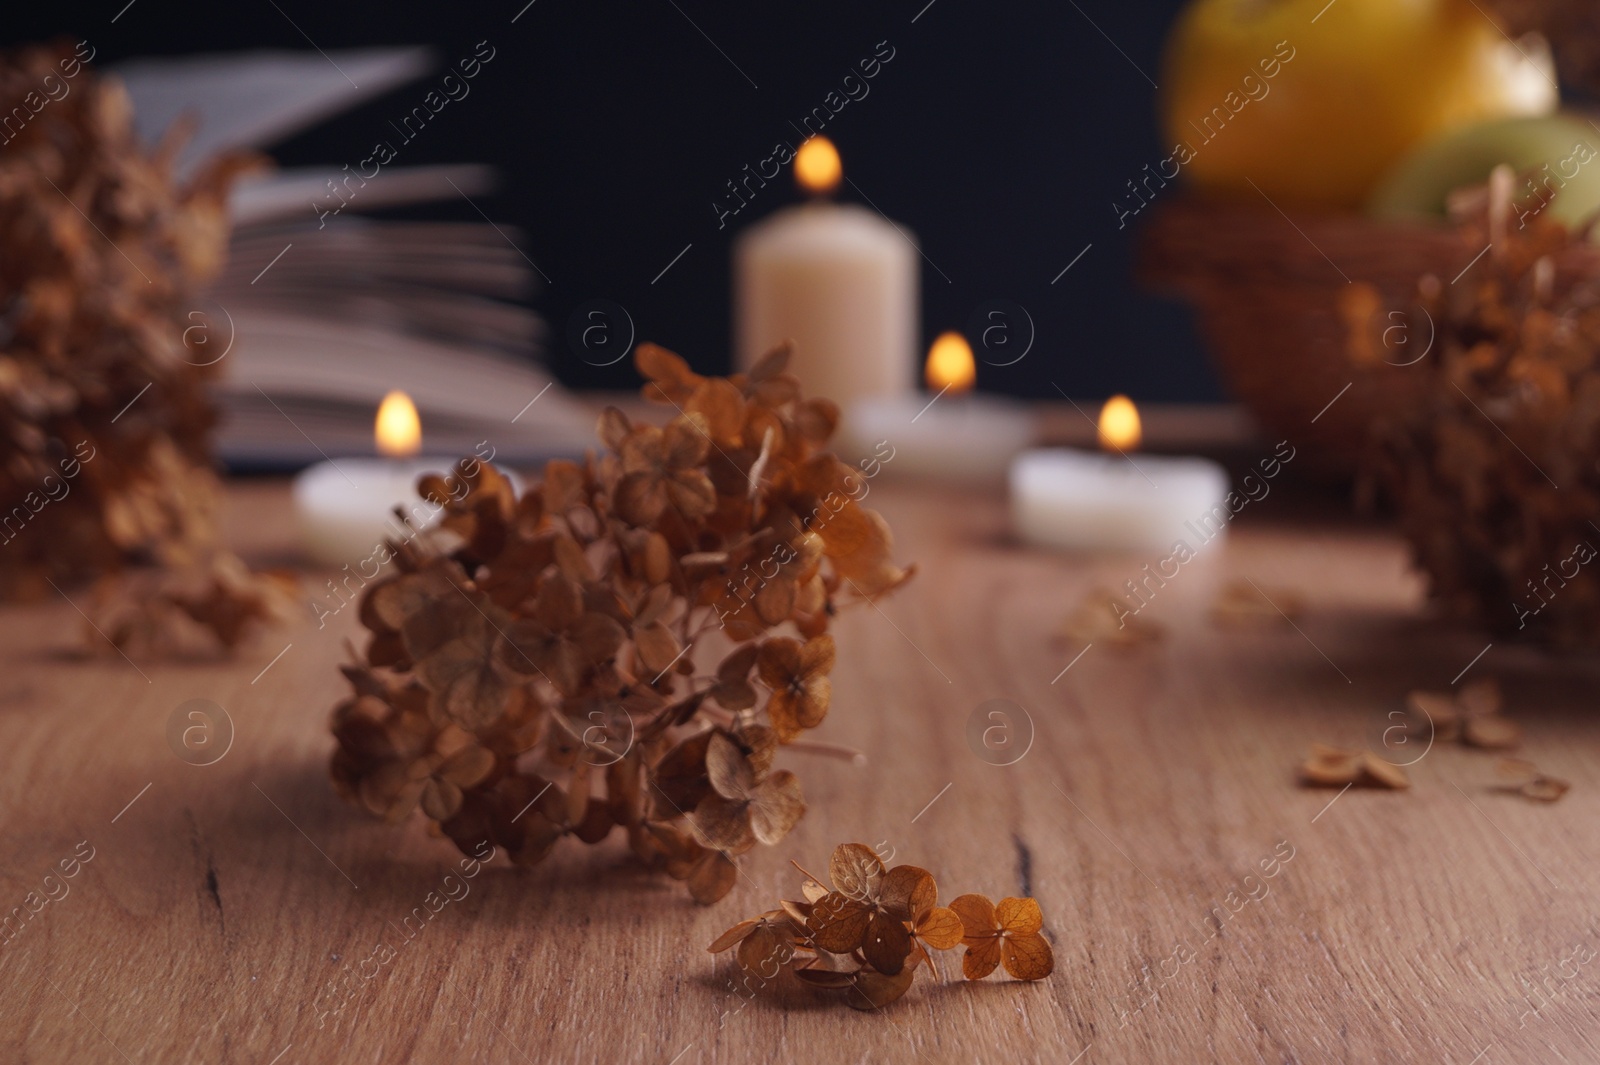 Photo of Dried hortensia flowers and burning candles on wooden table, closeup